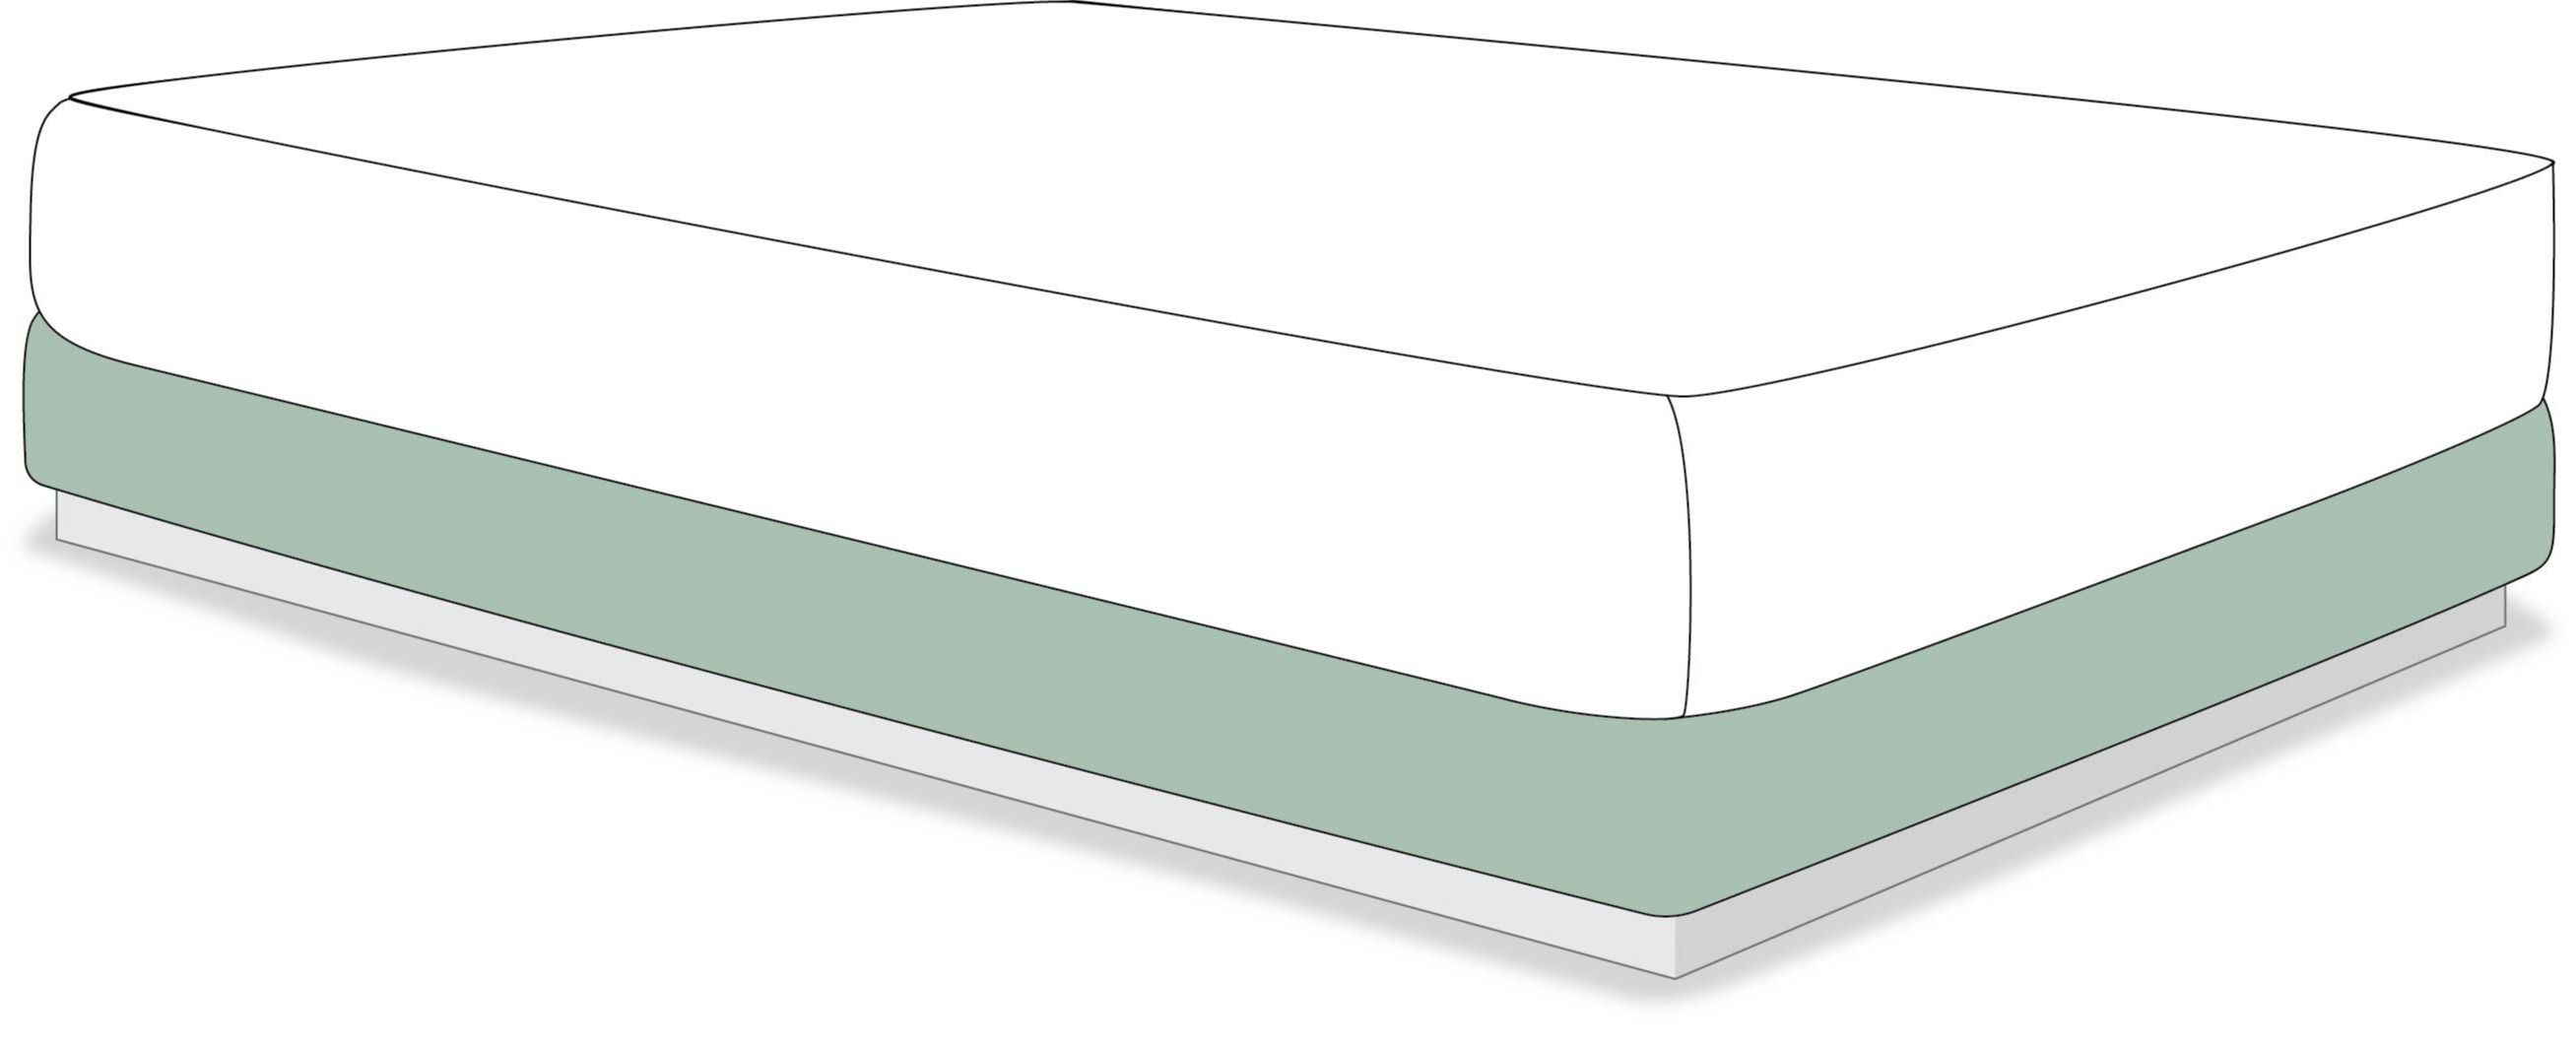 Vela Fitted Box Spring - Available as a Wrap or Cover